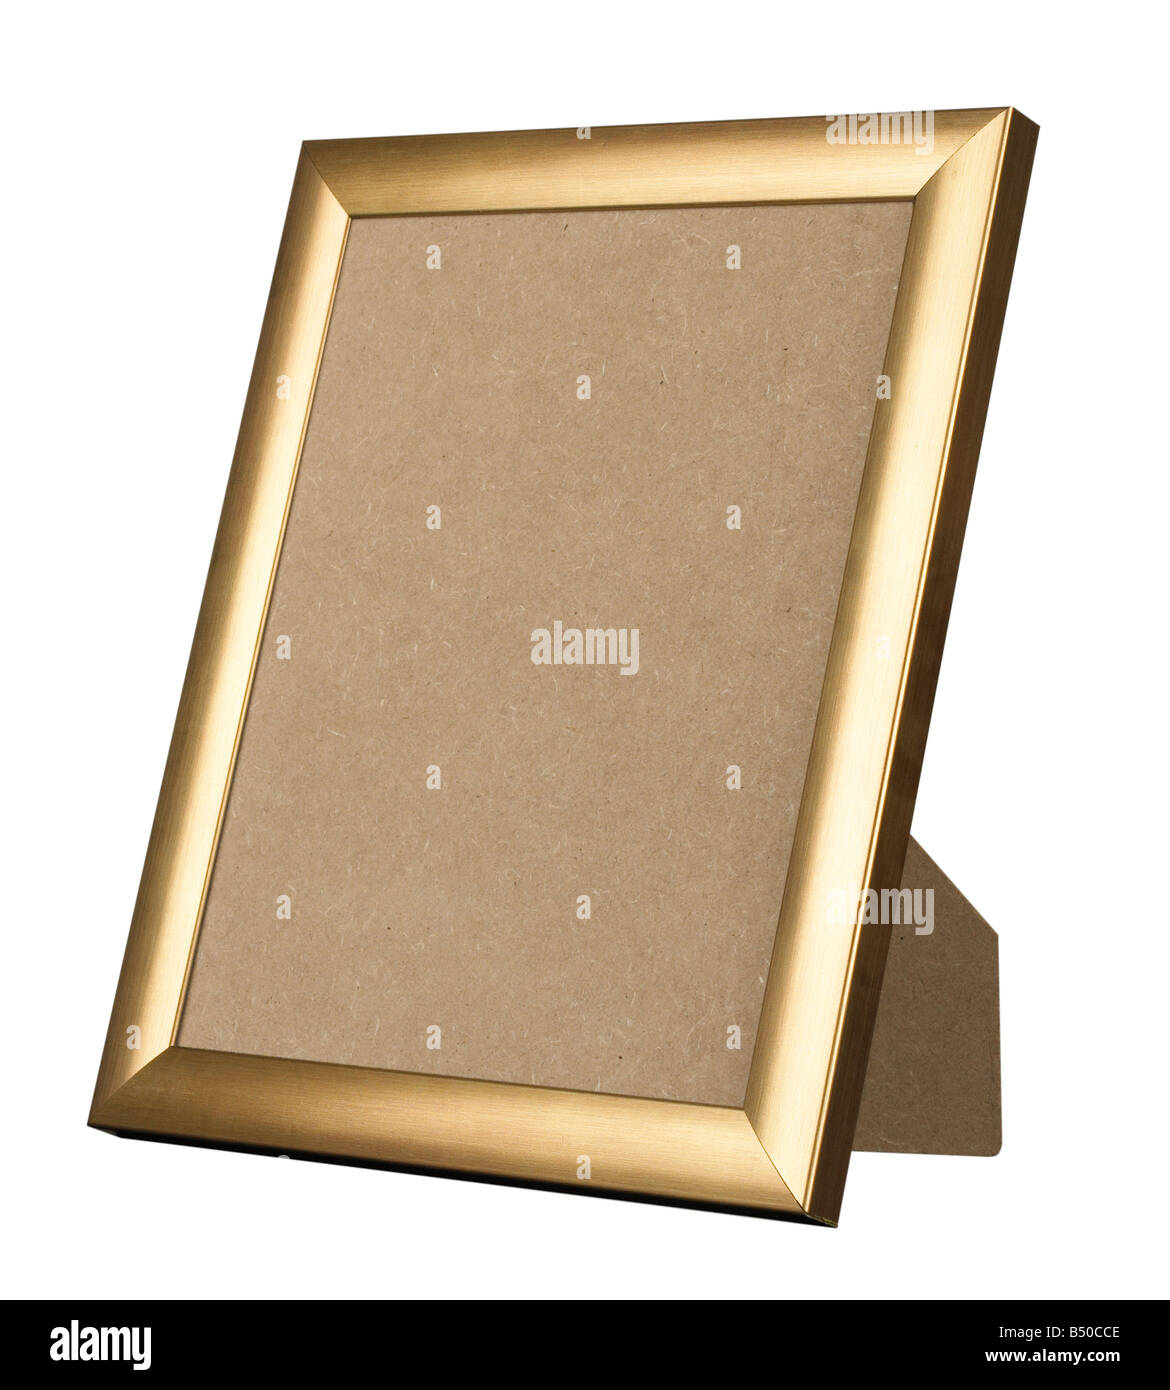 PICTURE FRAME GOLD GILT WOOD STANDING UPRIGHT Stock Photo